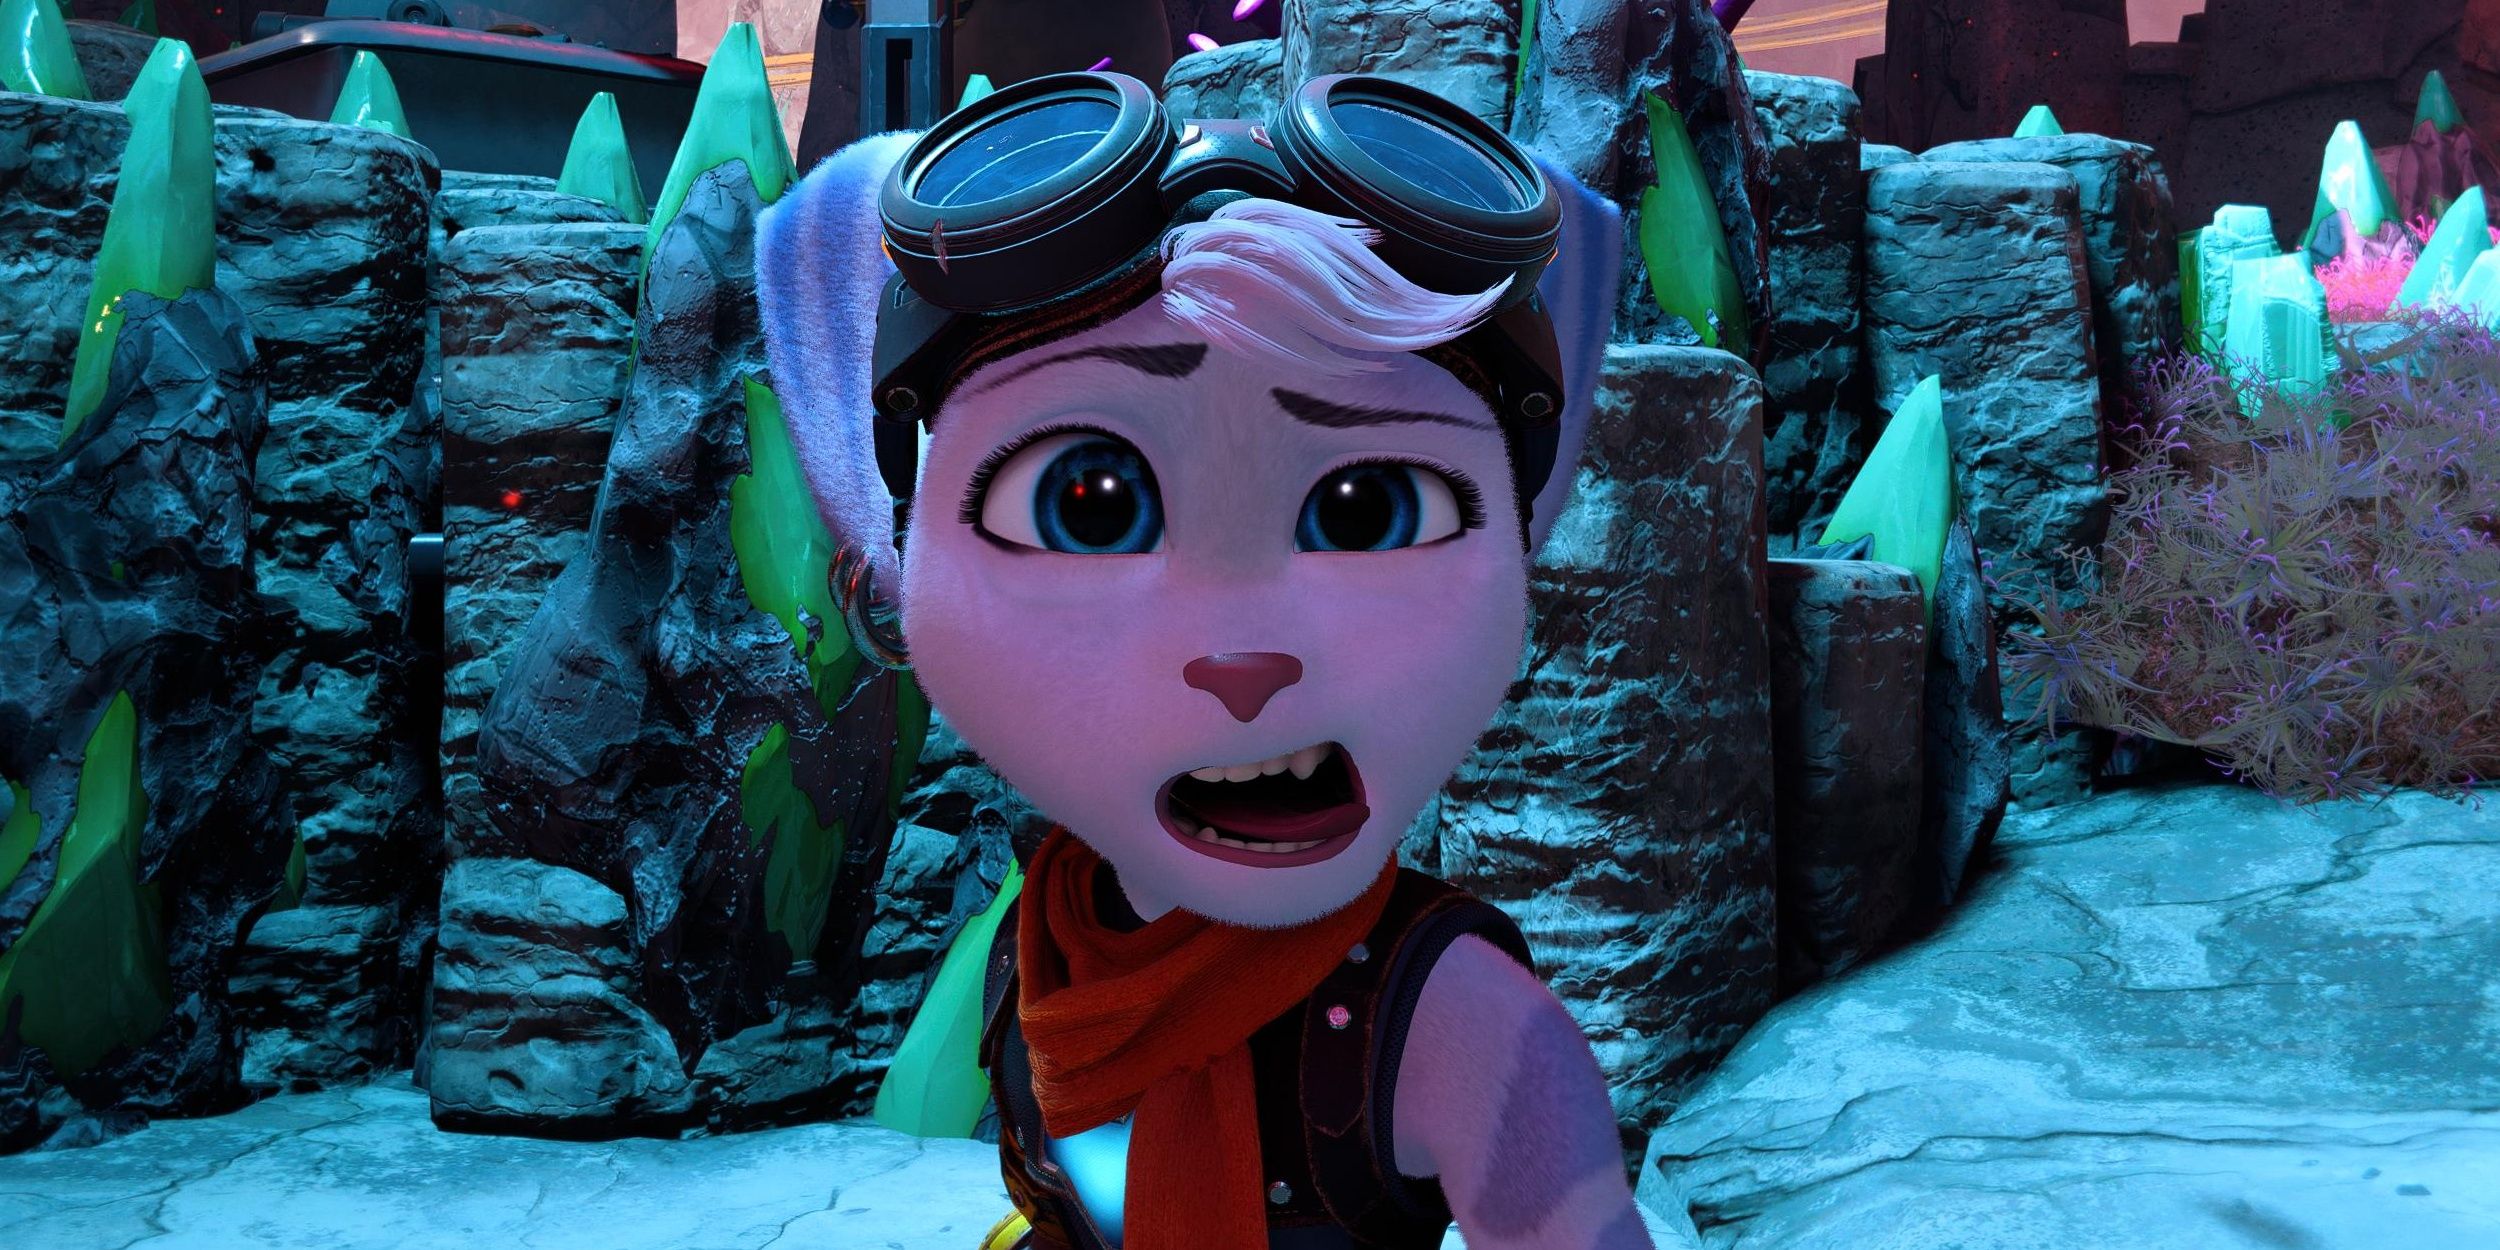 Rivet making a silly face at the camera in Ratchet and Clank: Rift Apart